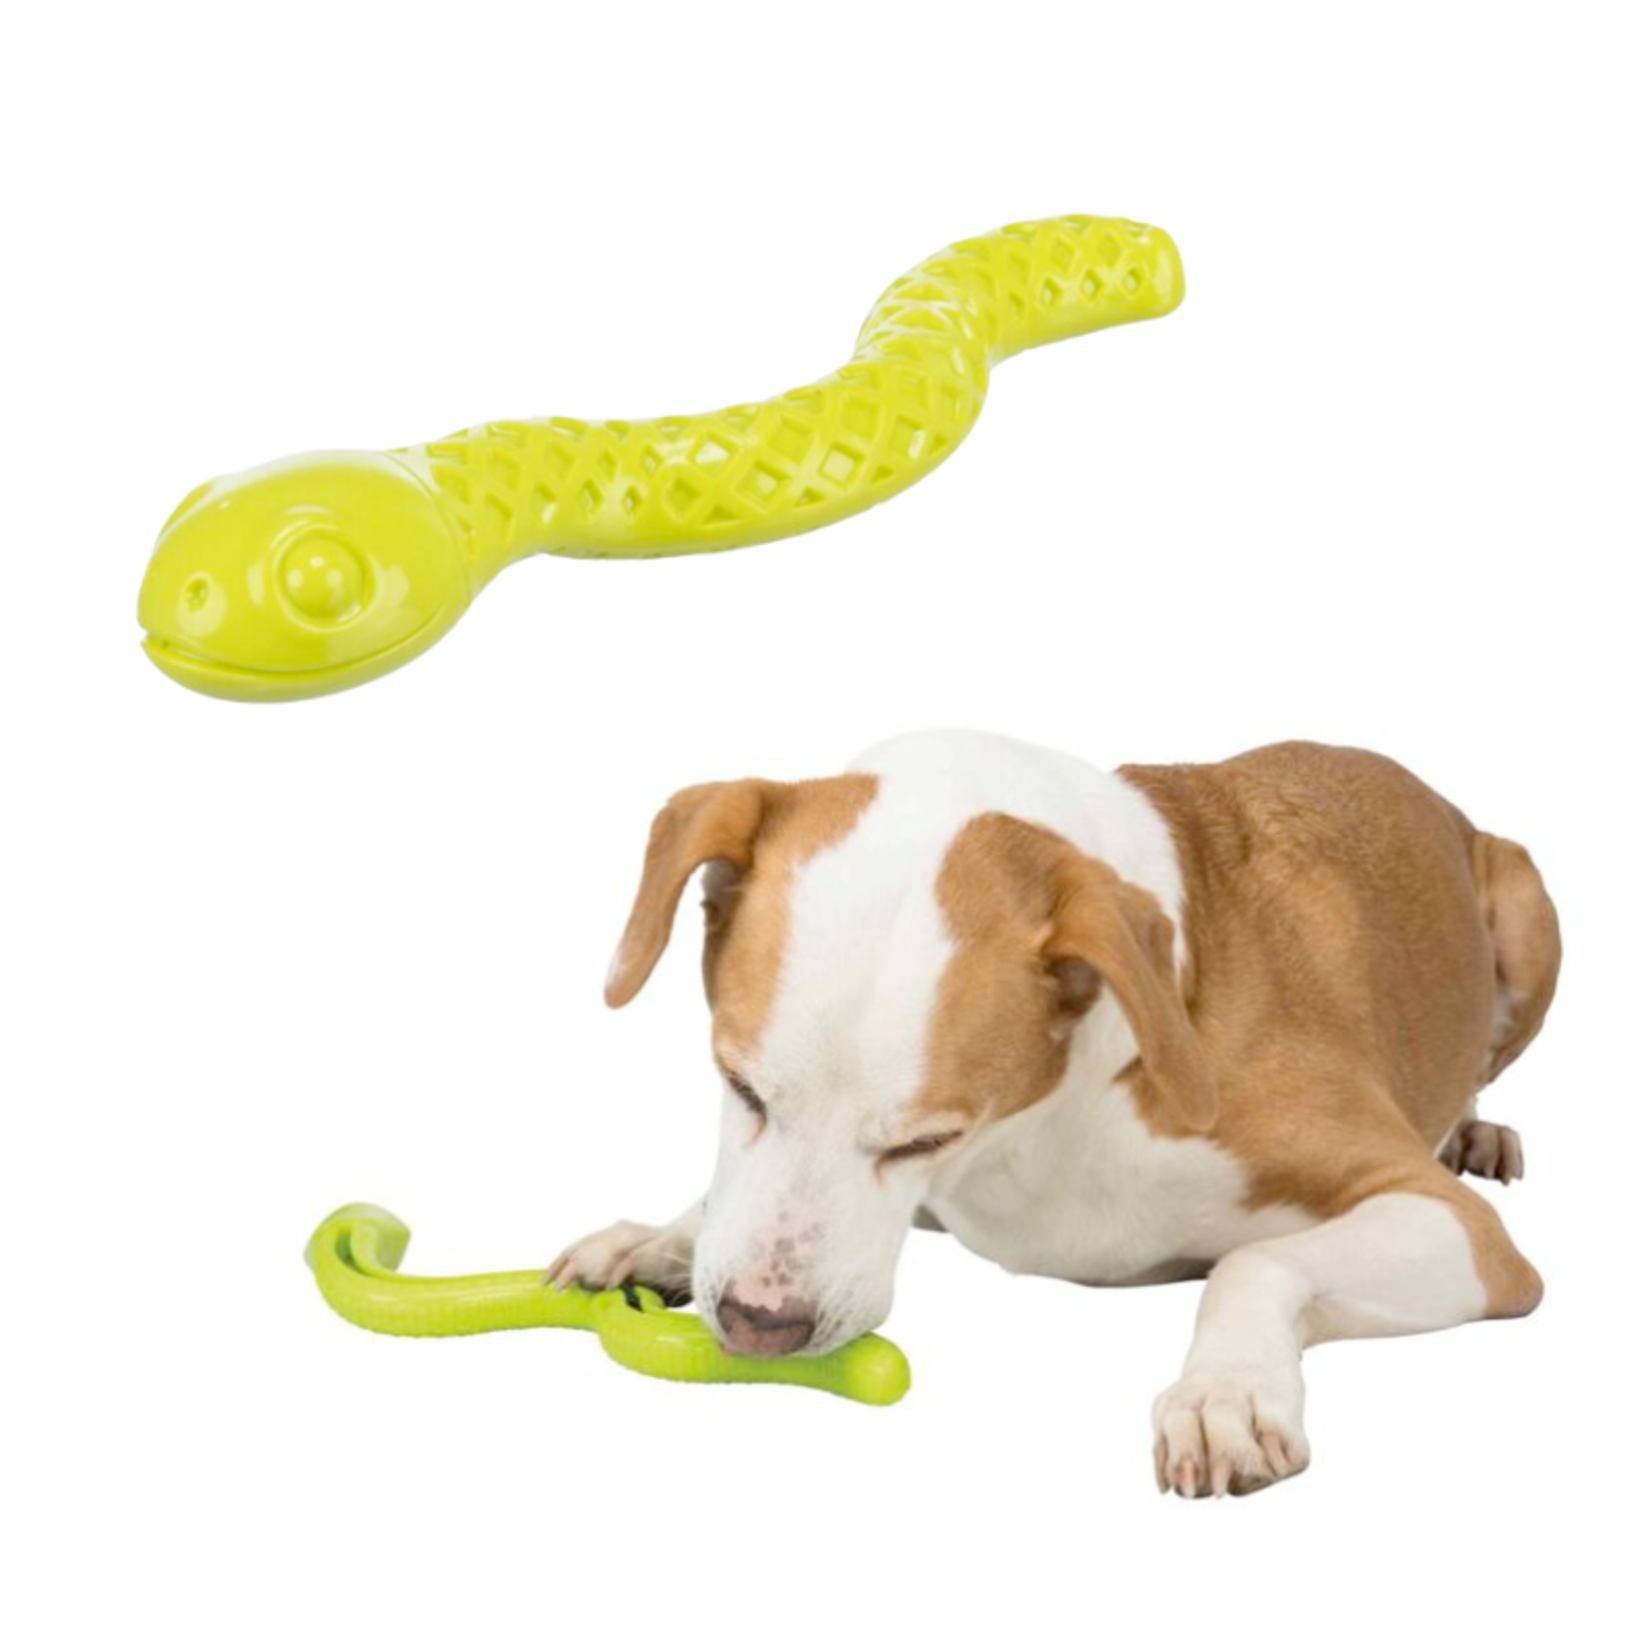 Trixie Squiggly Snake - Stuffable Toy - Trixie